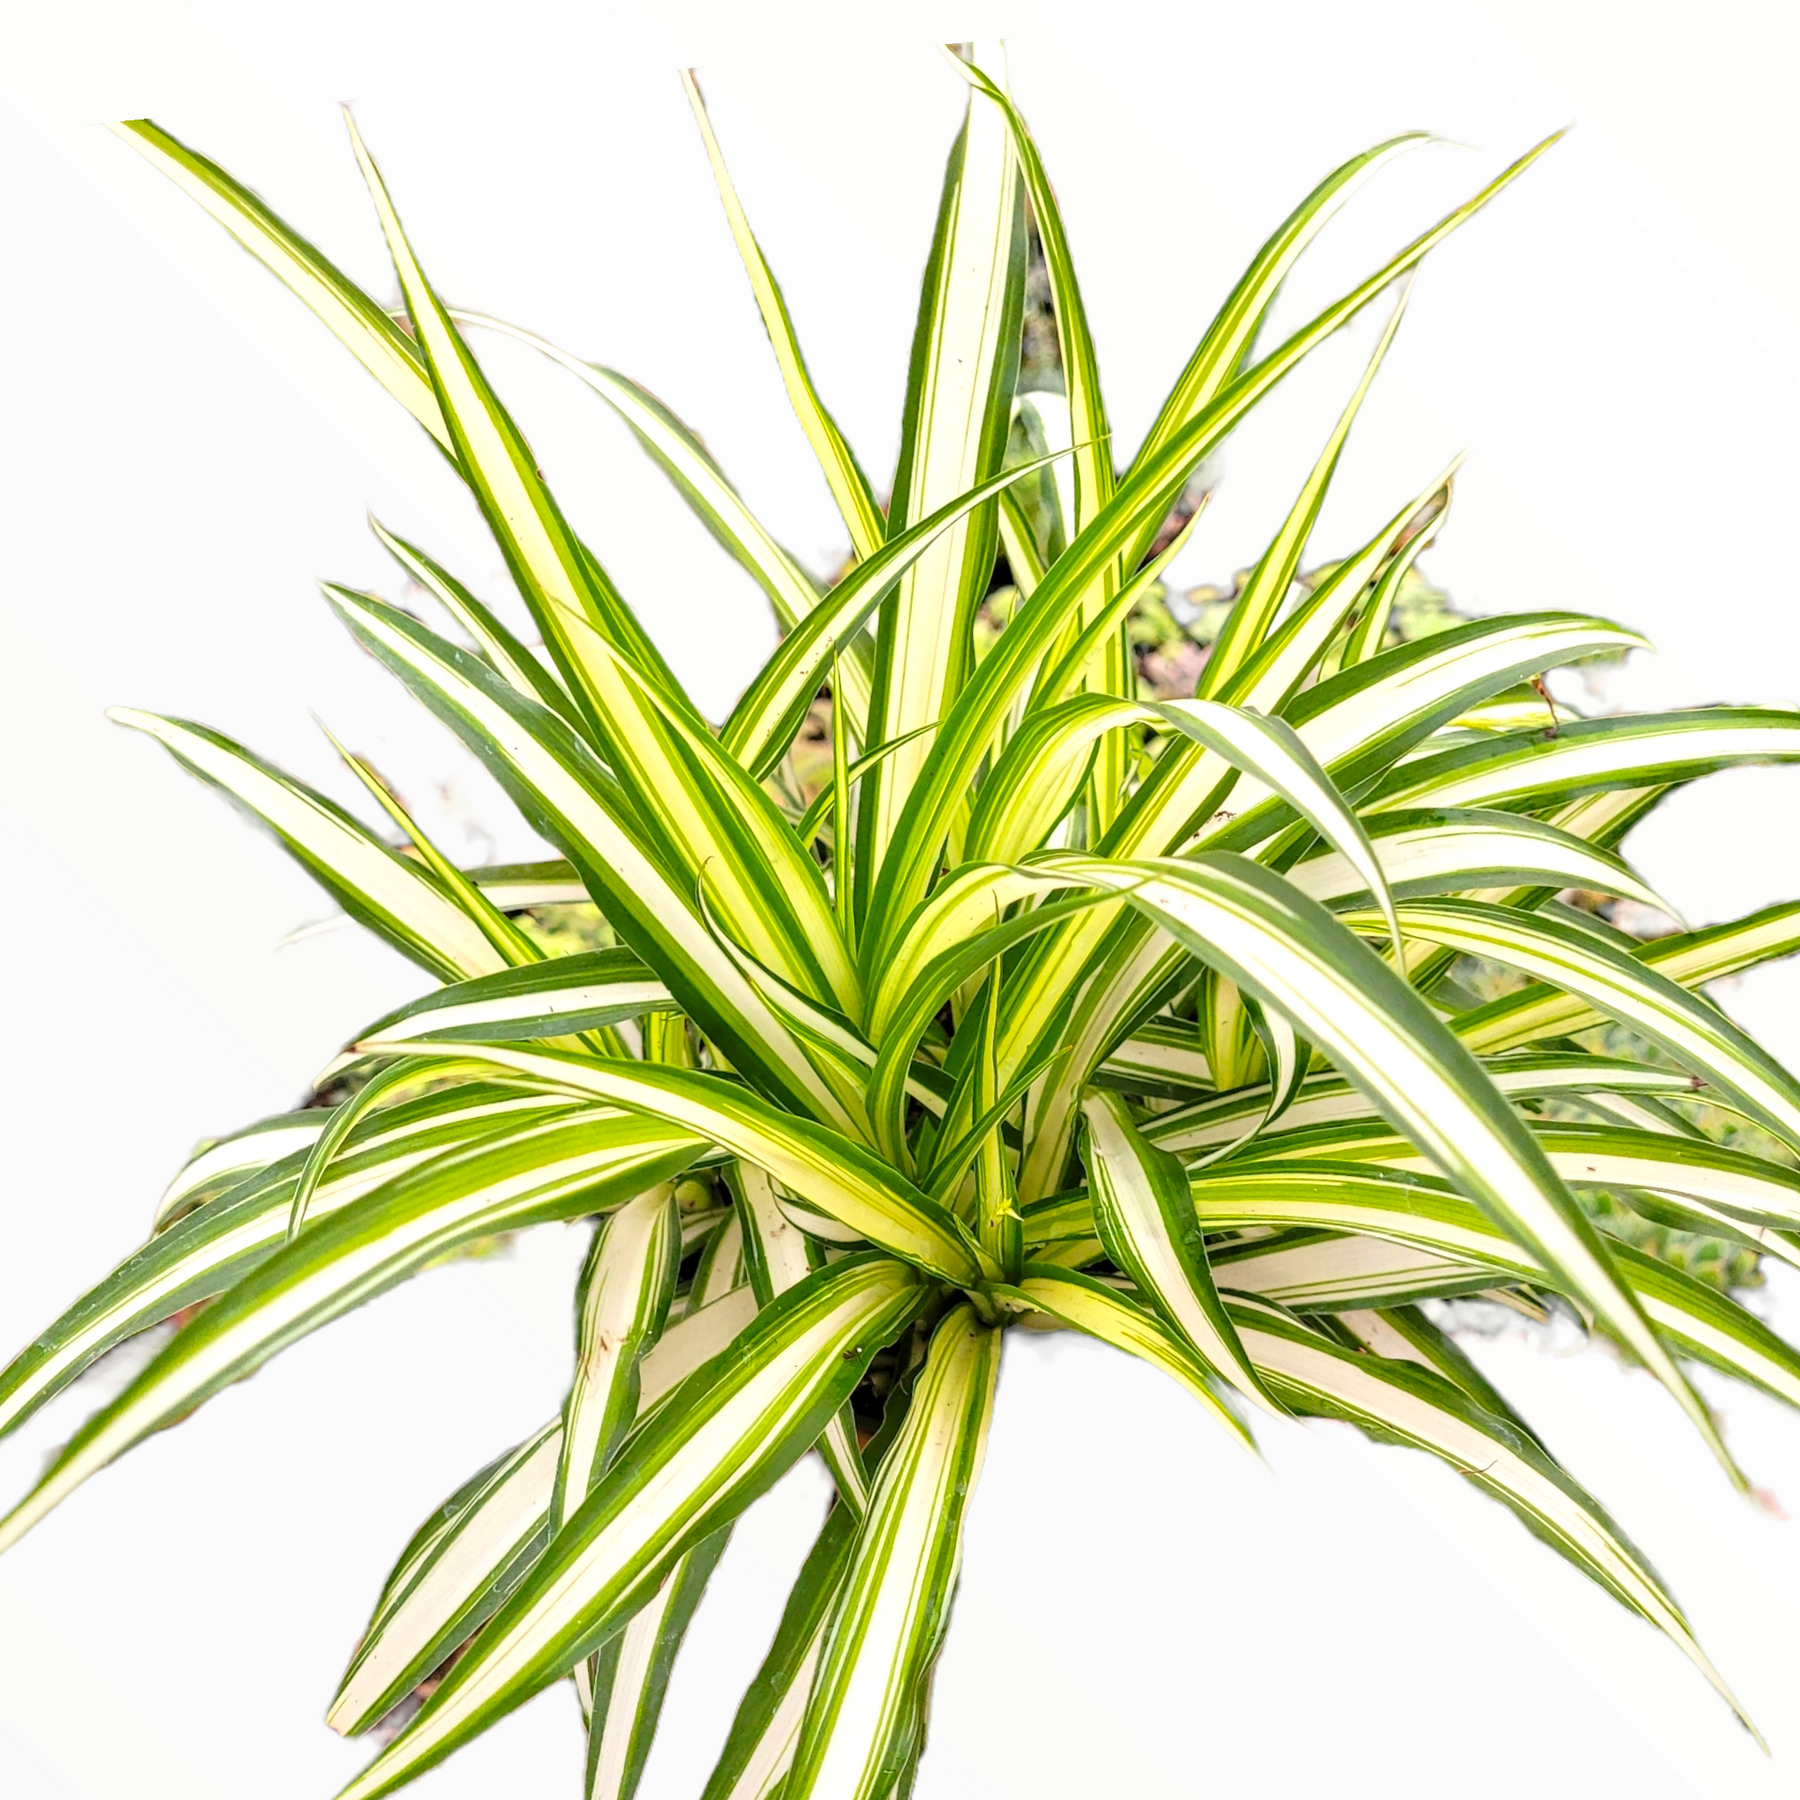 How to Grow and Care For Spider Plants - A Beautiful Mess